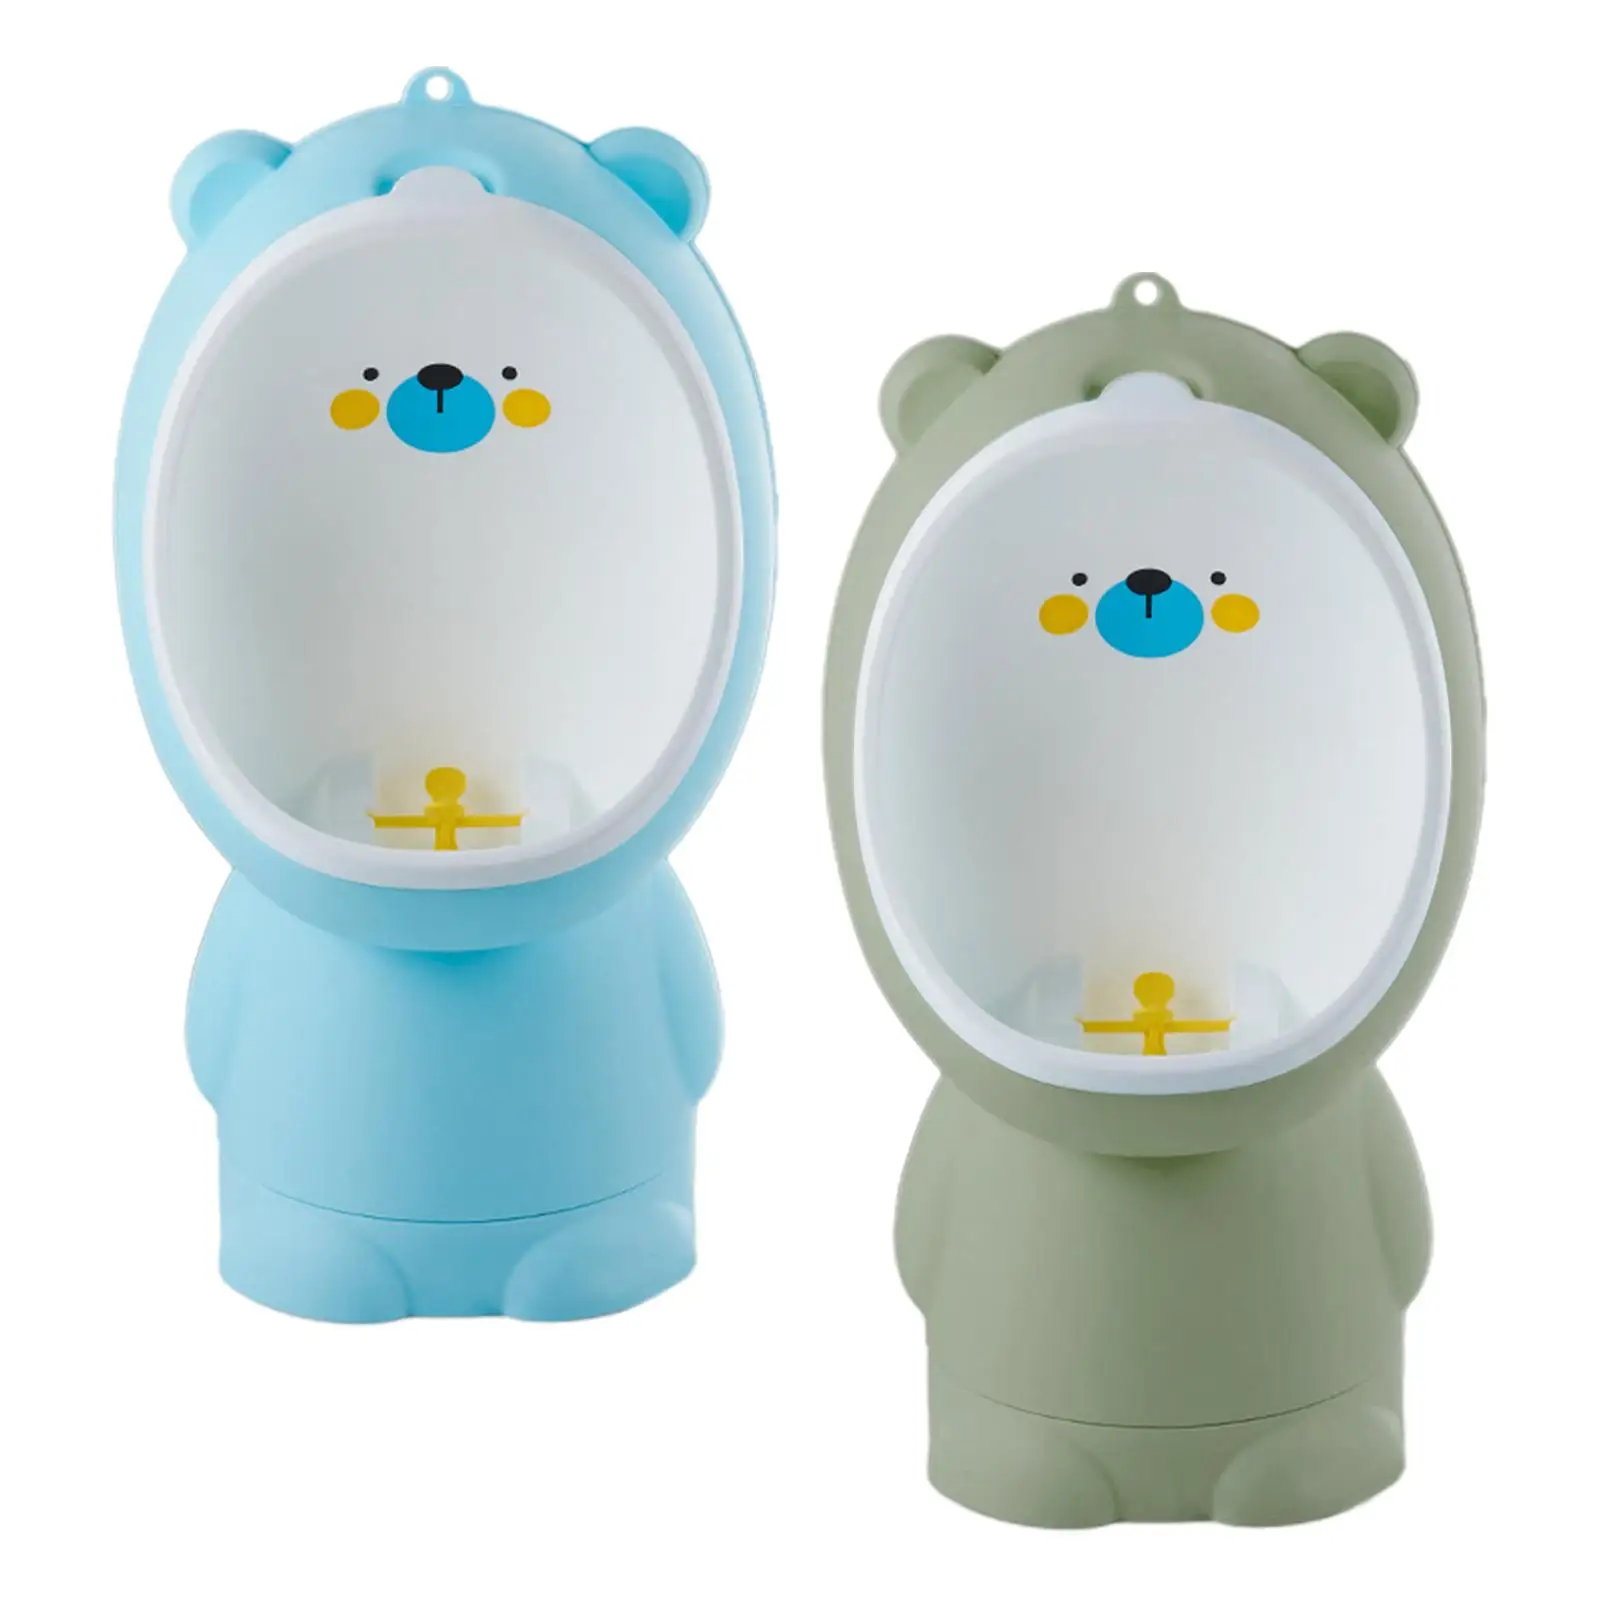 Potty Trainer Urinal Wall Mounted Children Stand Vertical Urinal Hanging Pee Trainer for Child Kids Boys Baby Toddlers